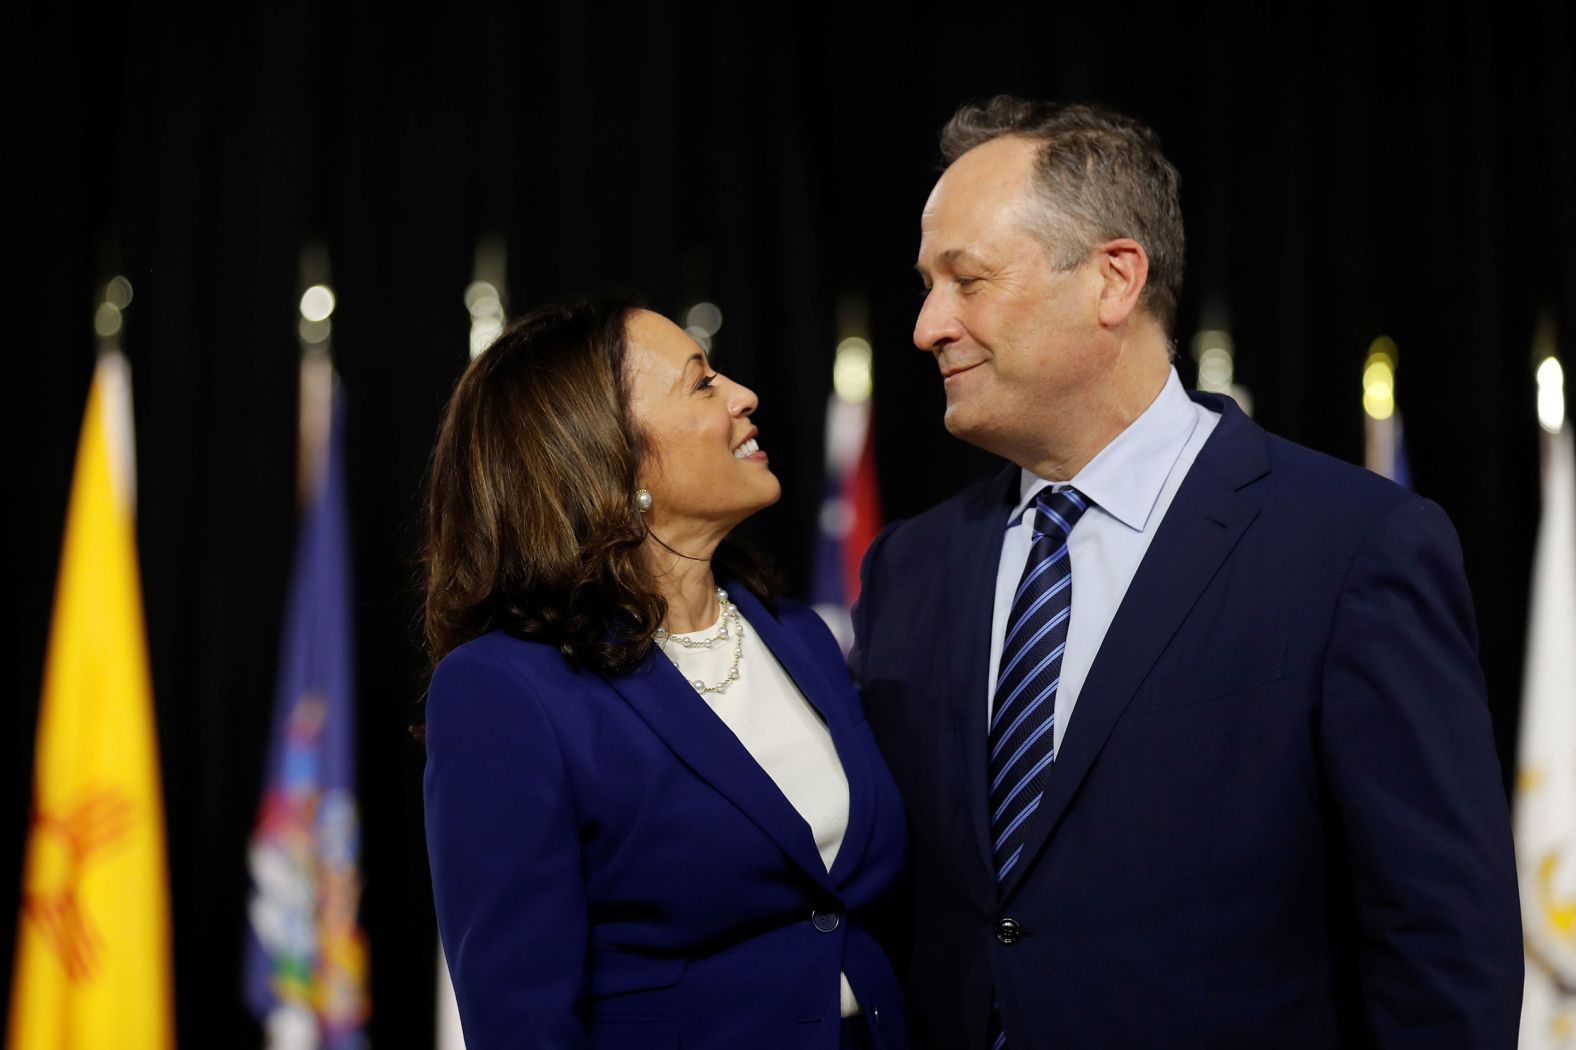 Harris smiles at her husband after her speech.